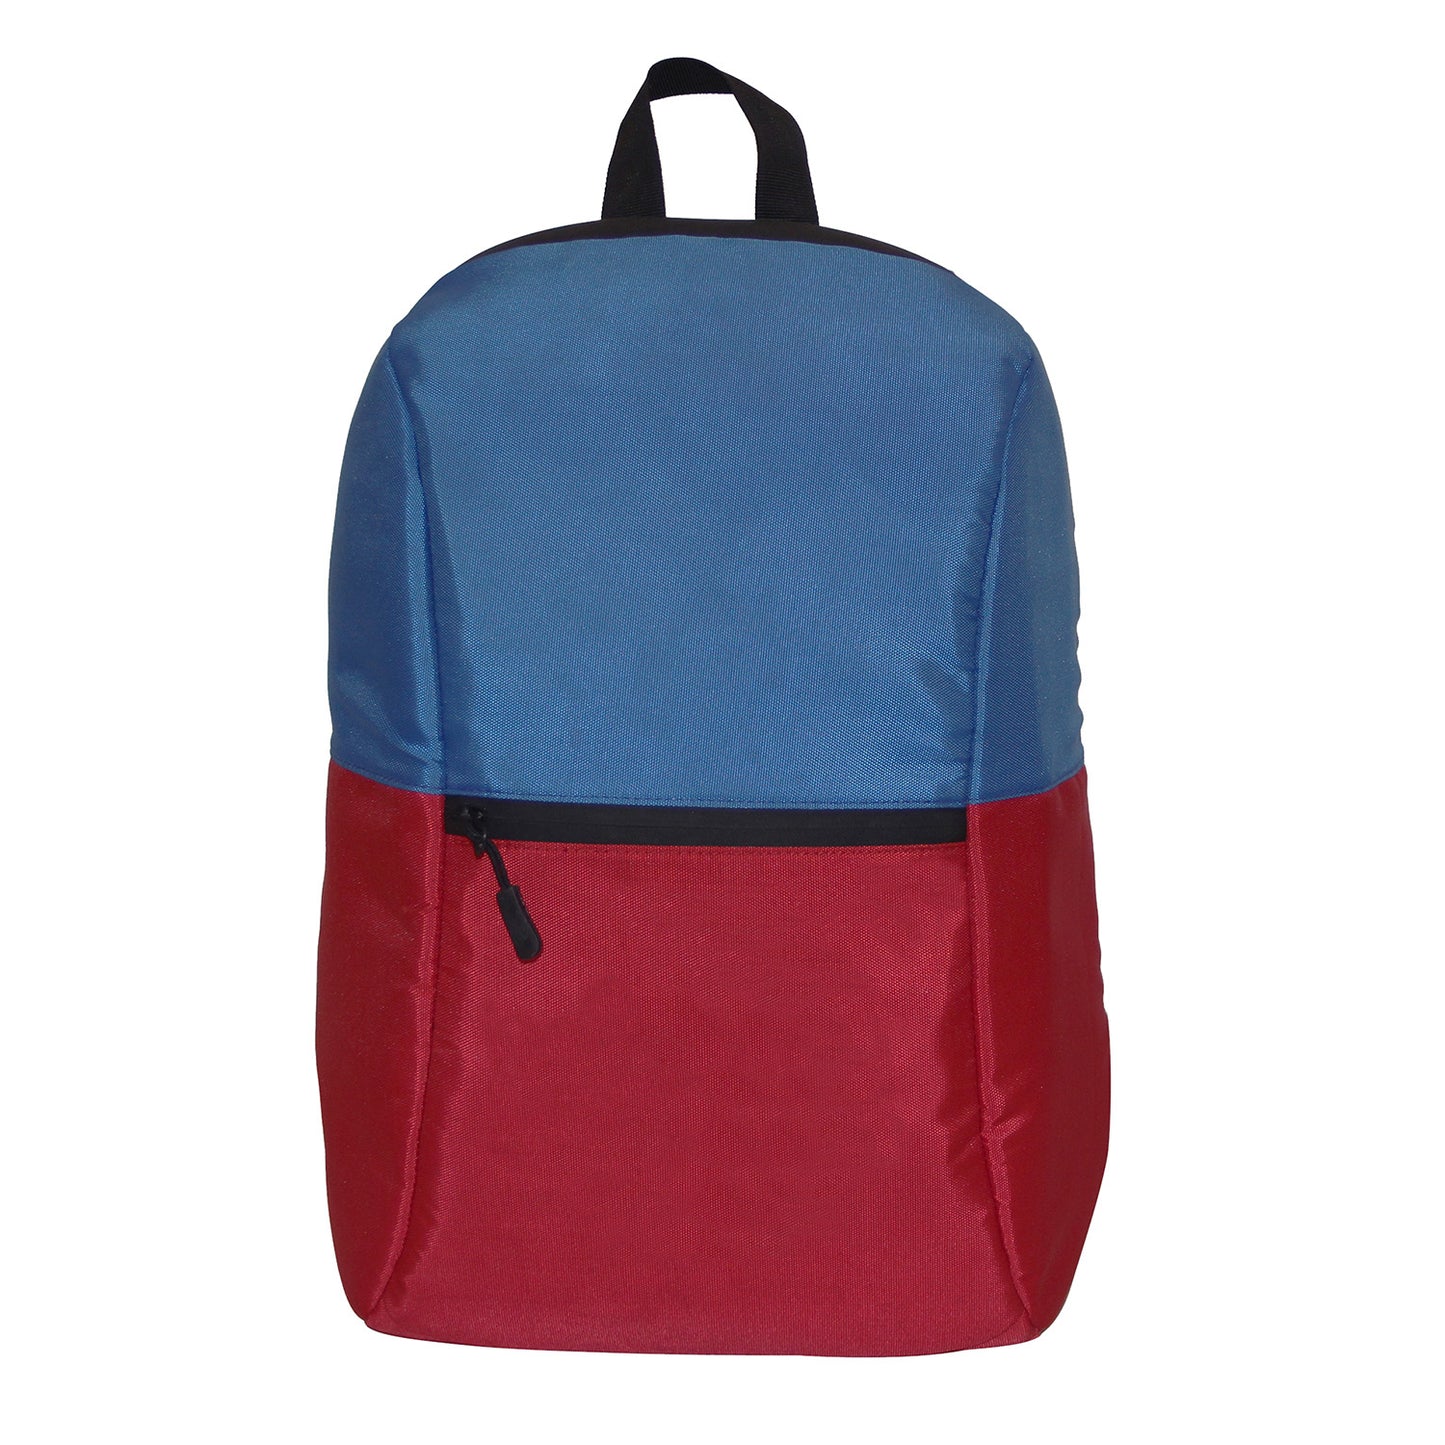 Anti-Theft Colorblock Backpack